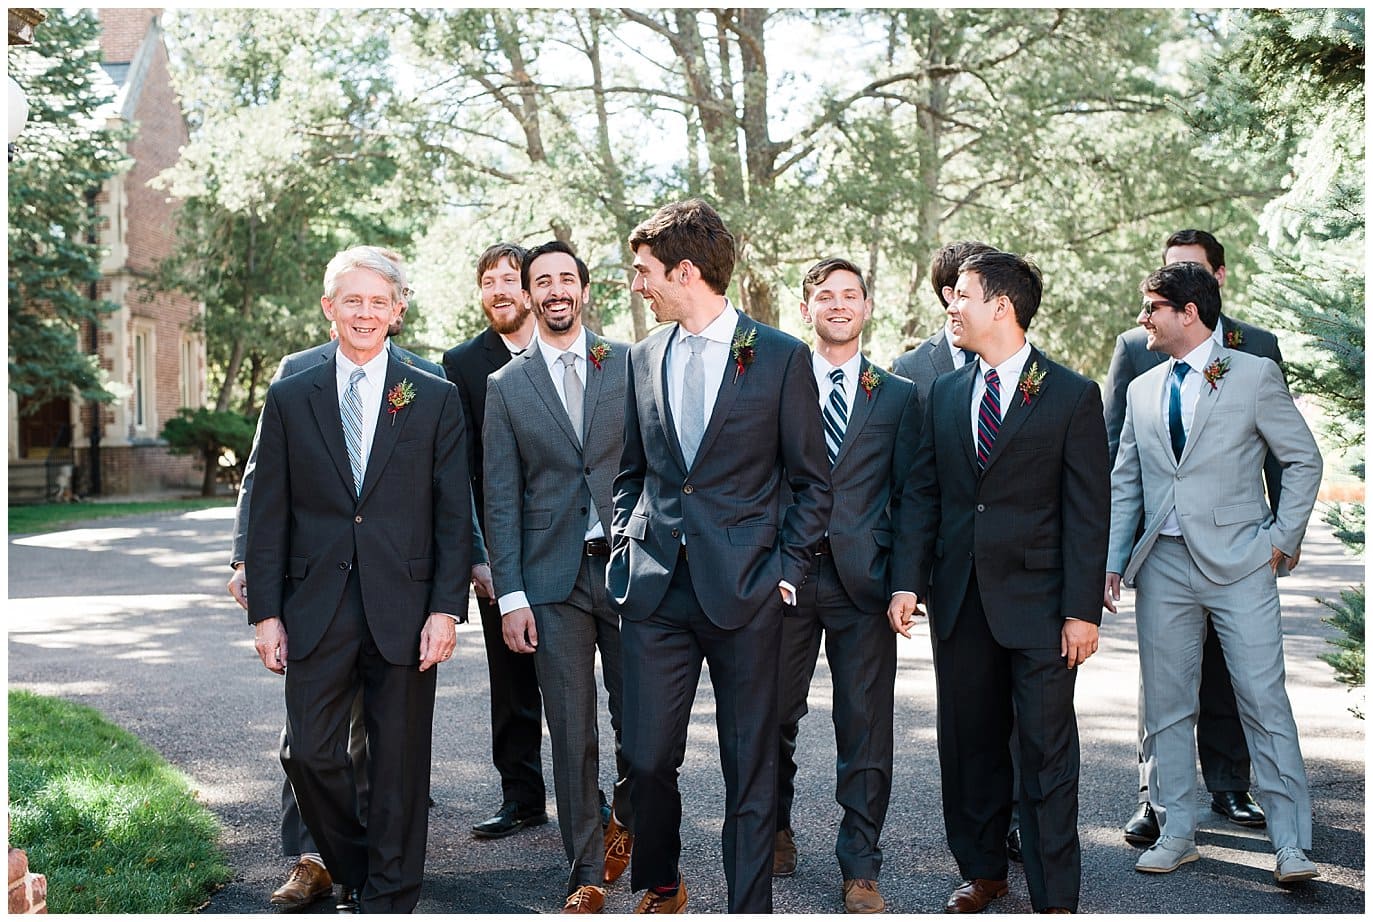 groomsmen in mismatched black and gray suits photo